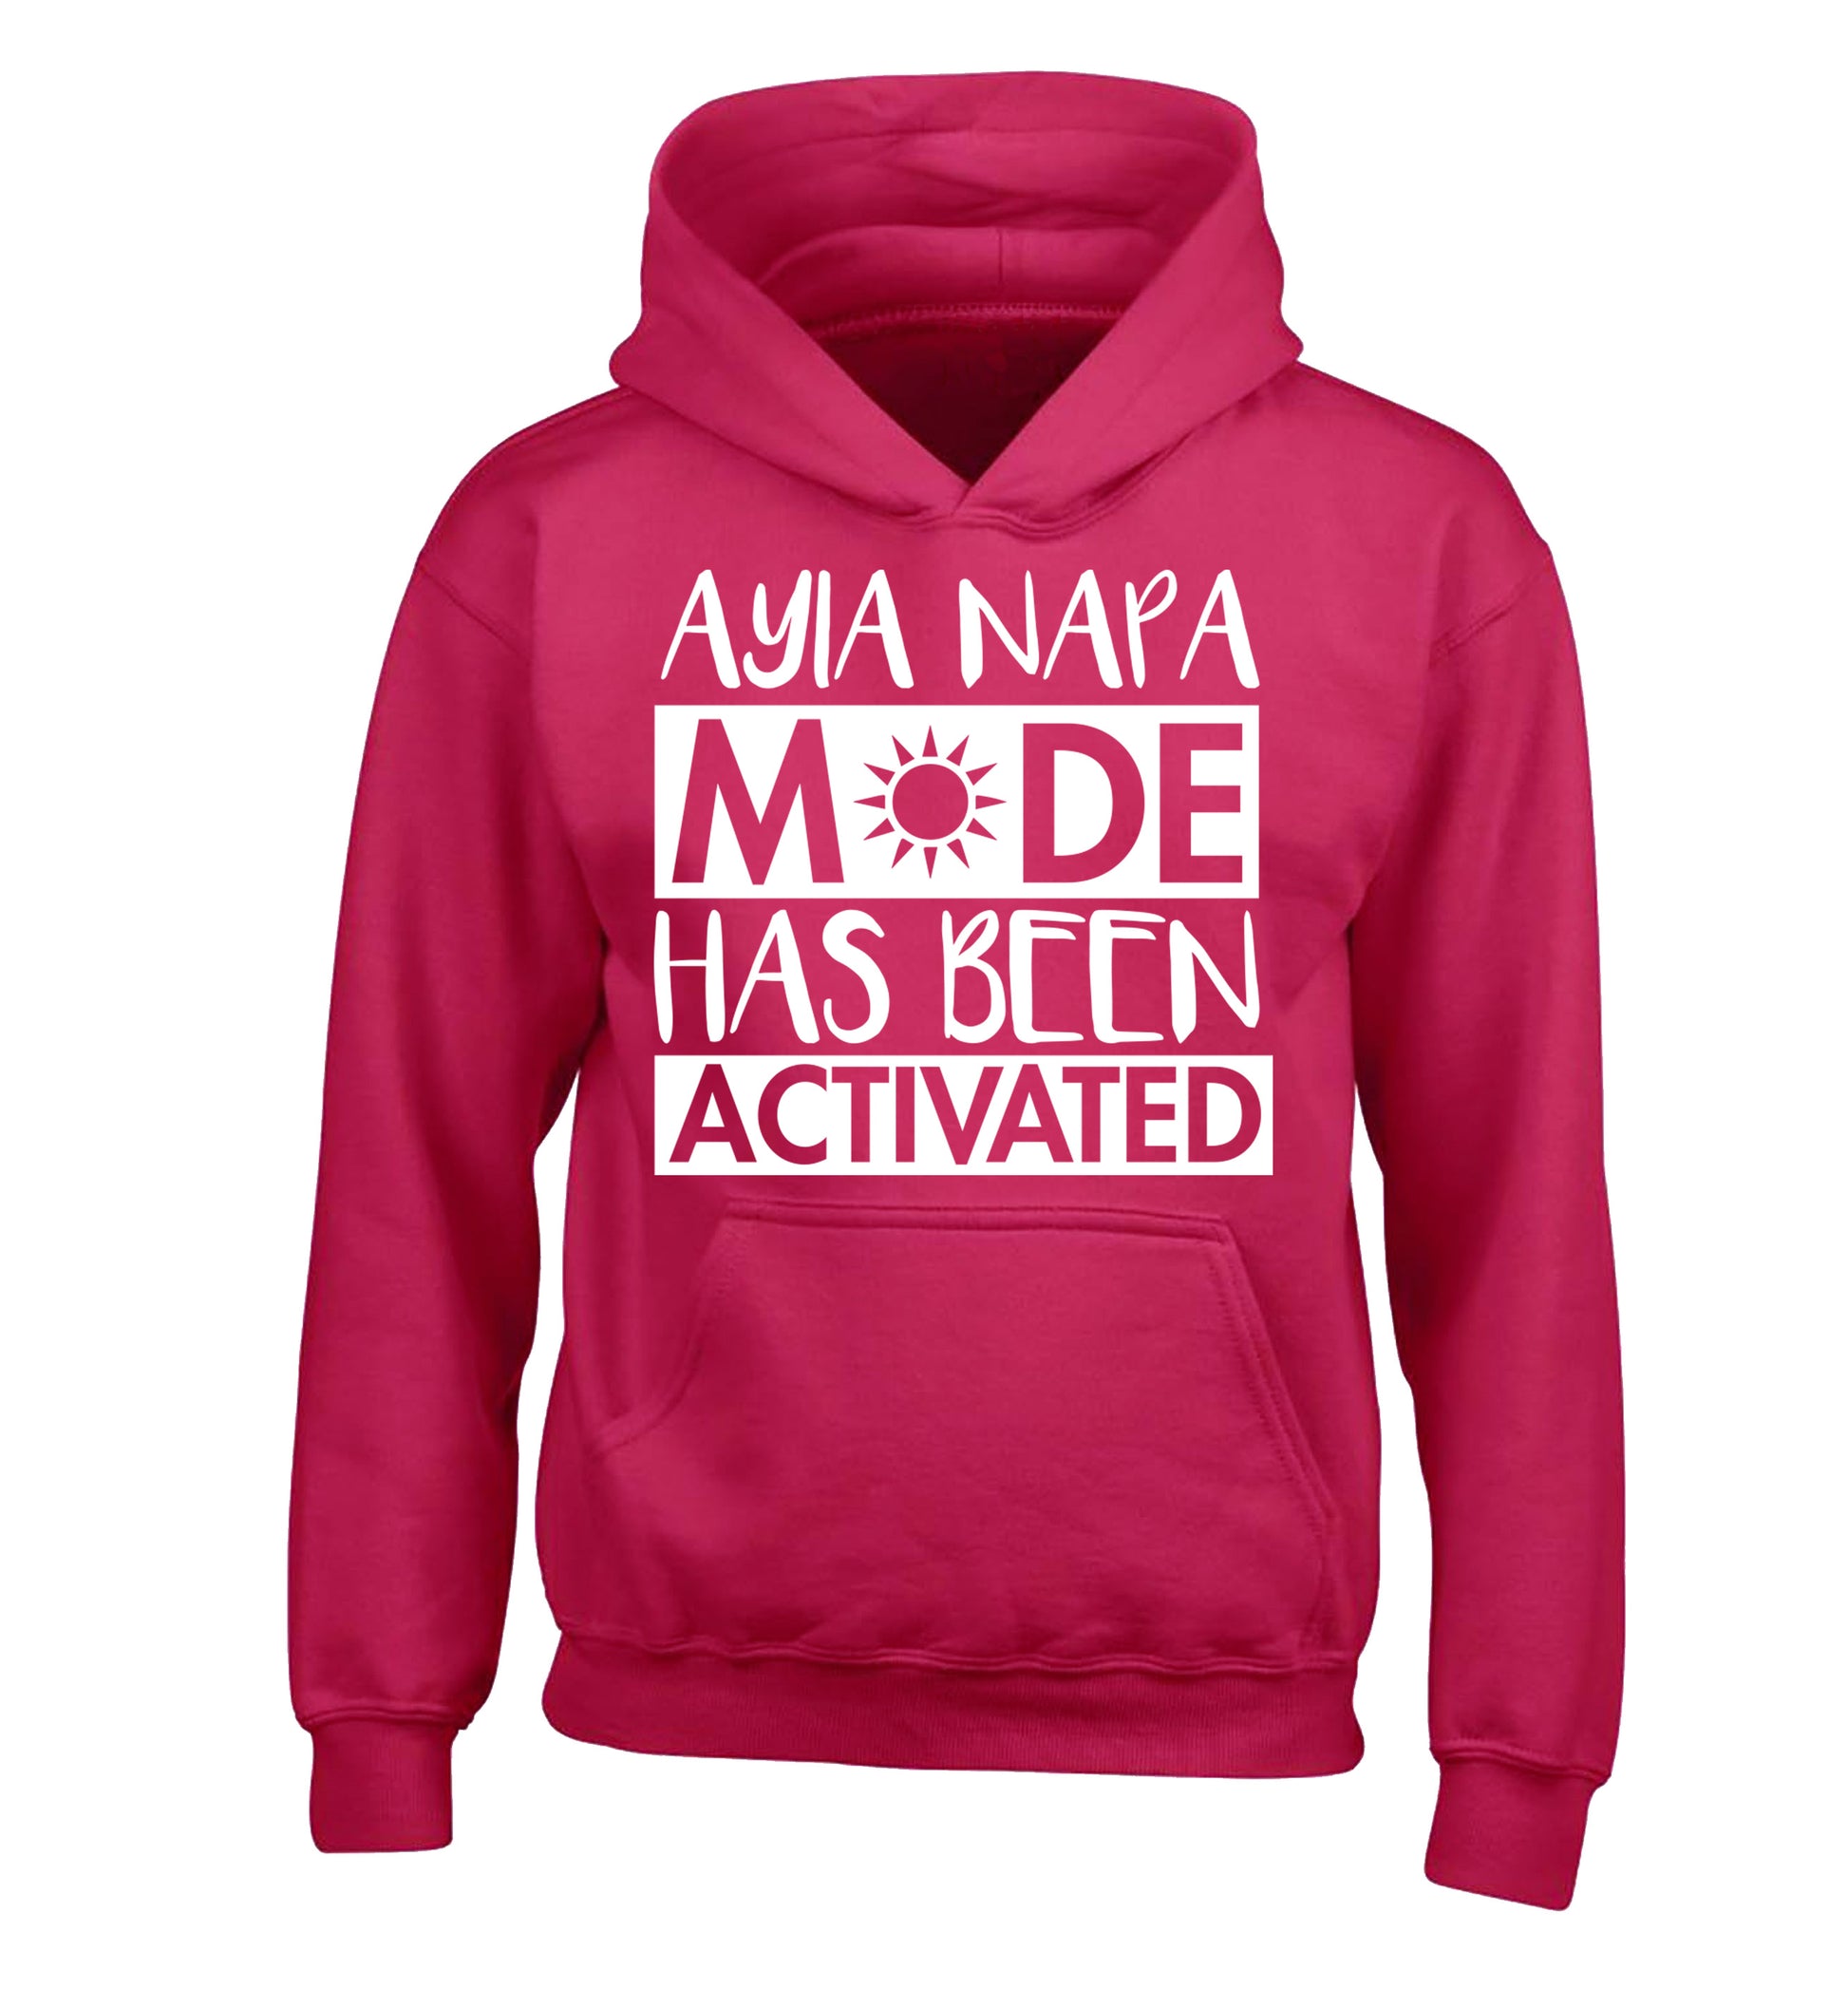 Ayia Napa mode has been activated children's pink hoodie 12-13 Years